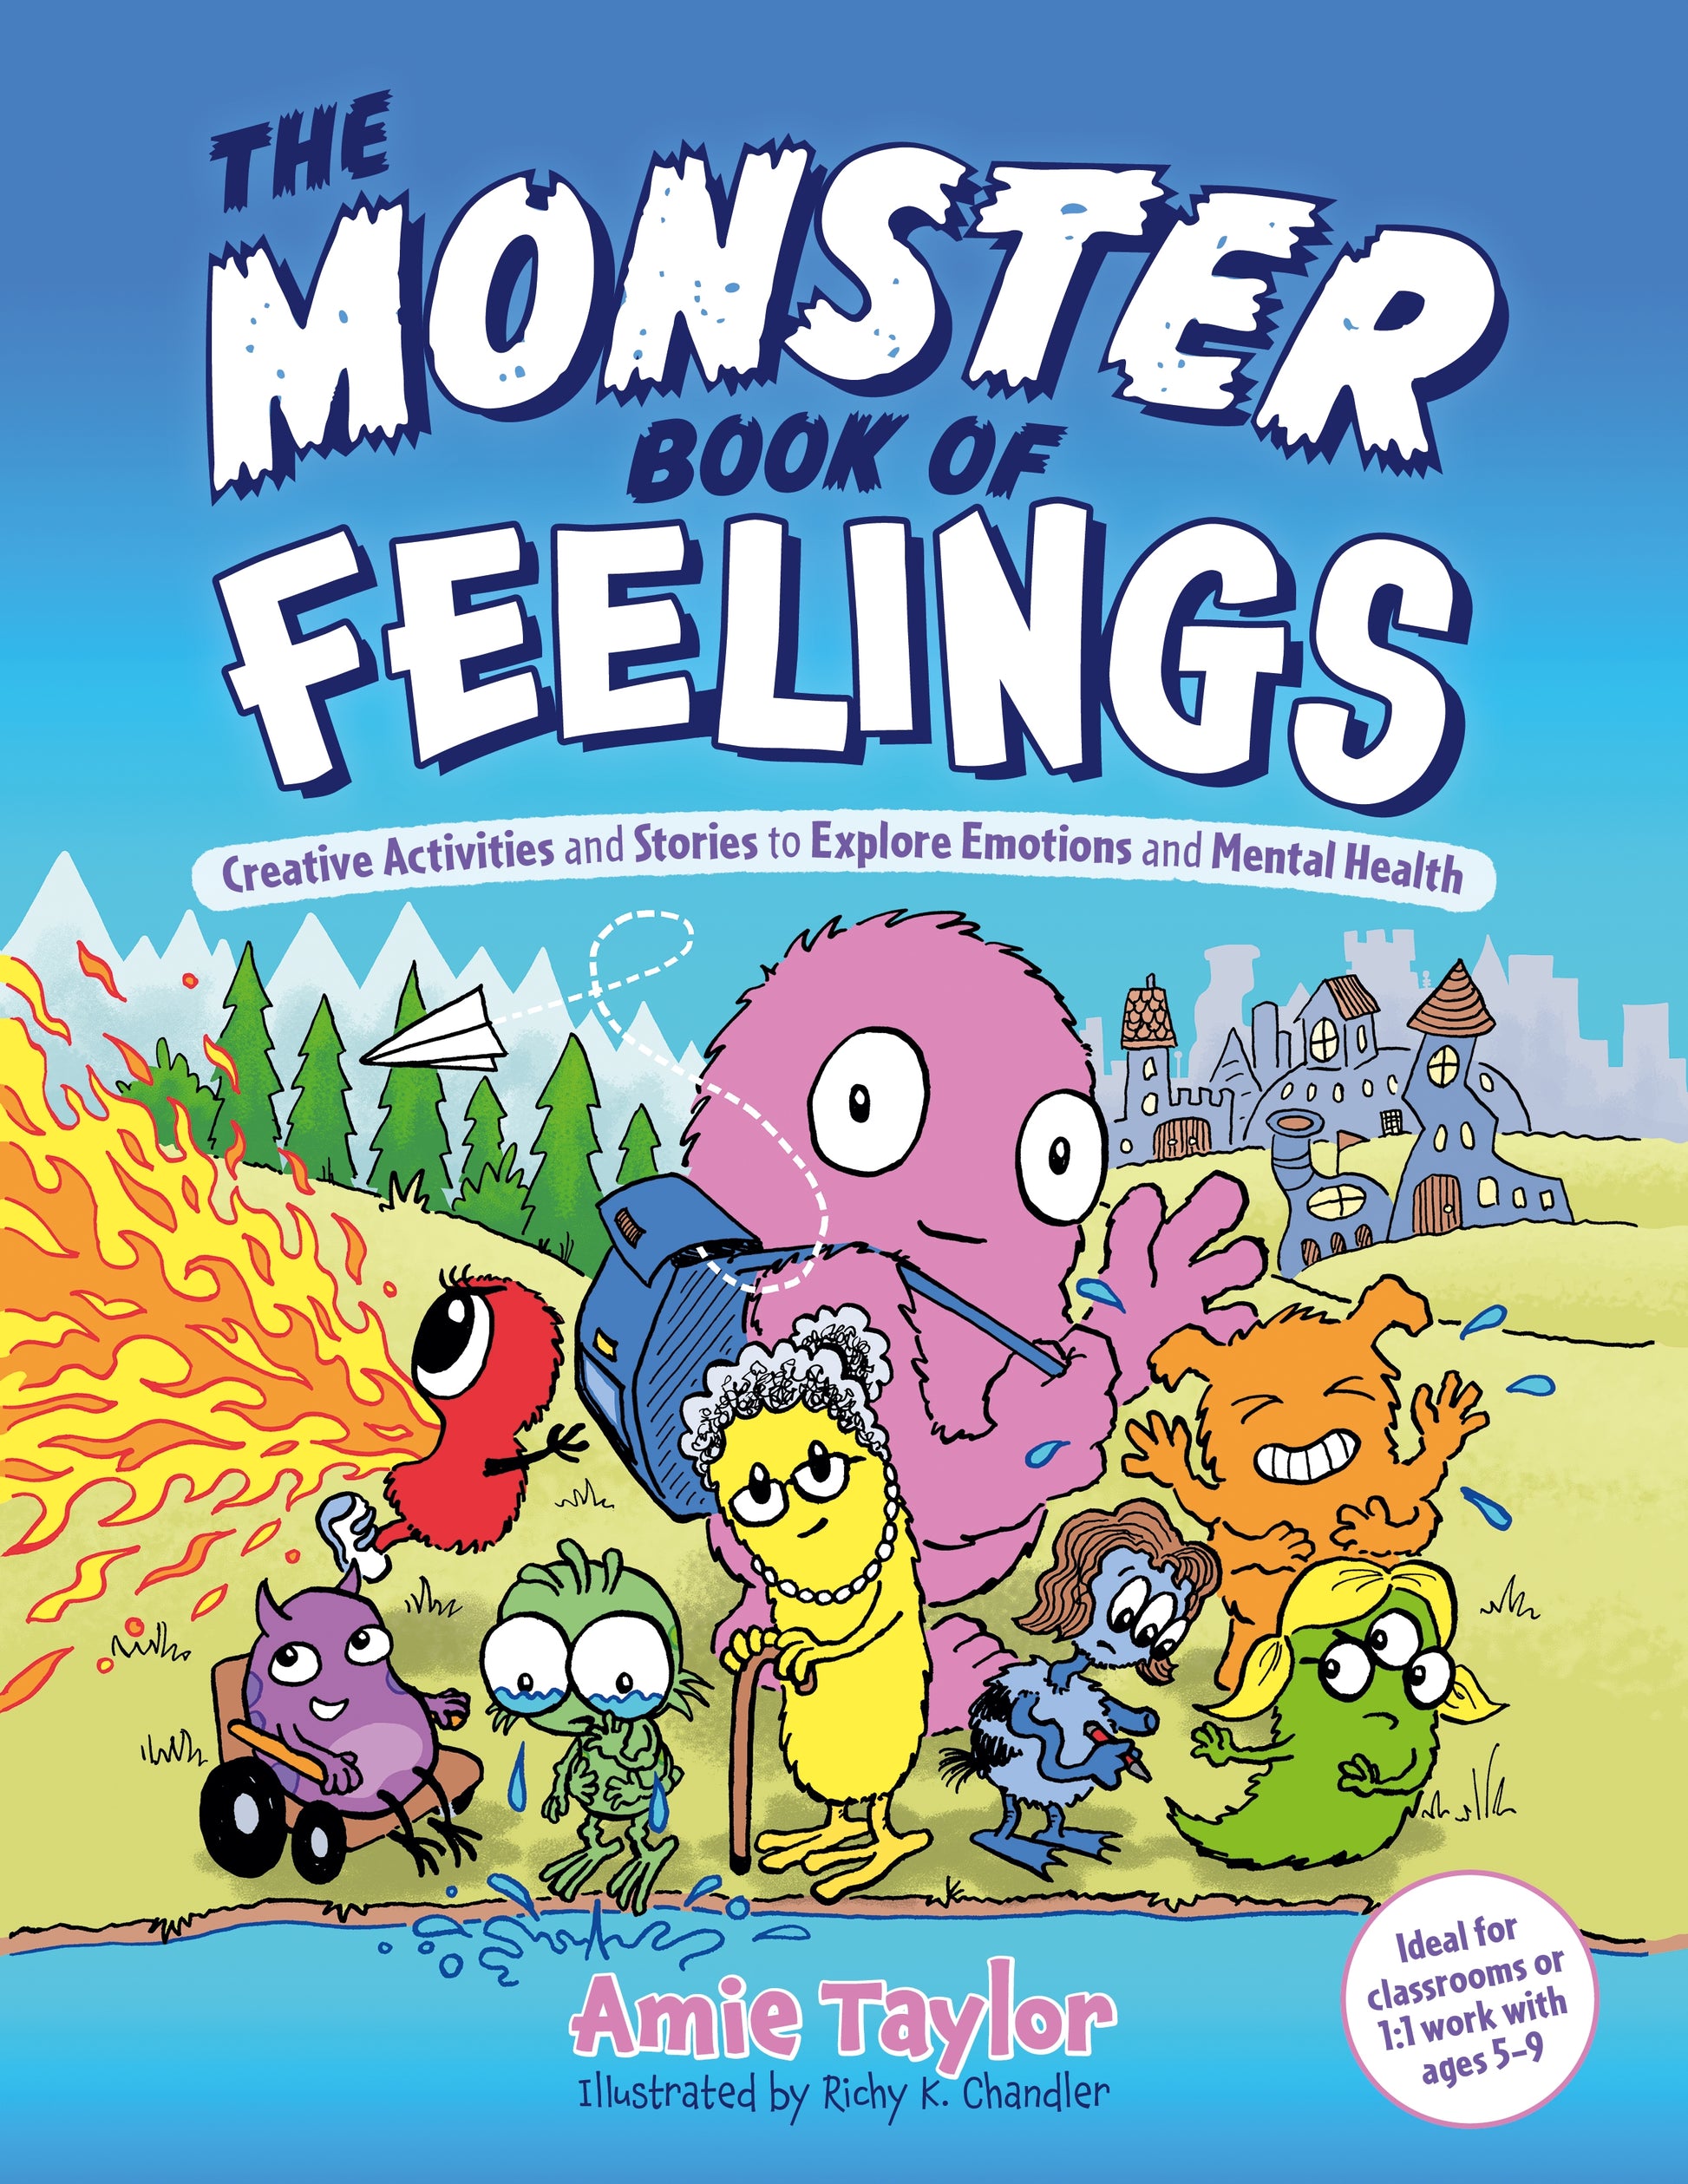 The Monster Book of Feelings by Amie Taylor, Richy K. Chandler